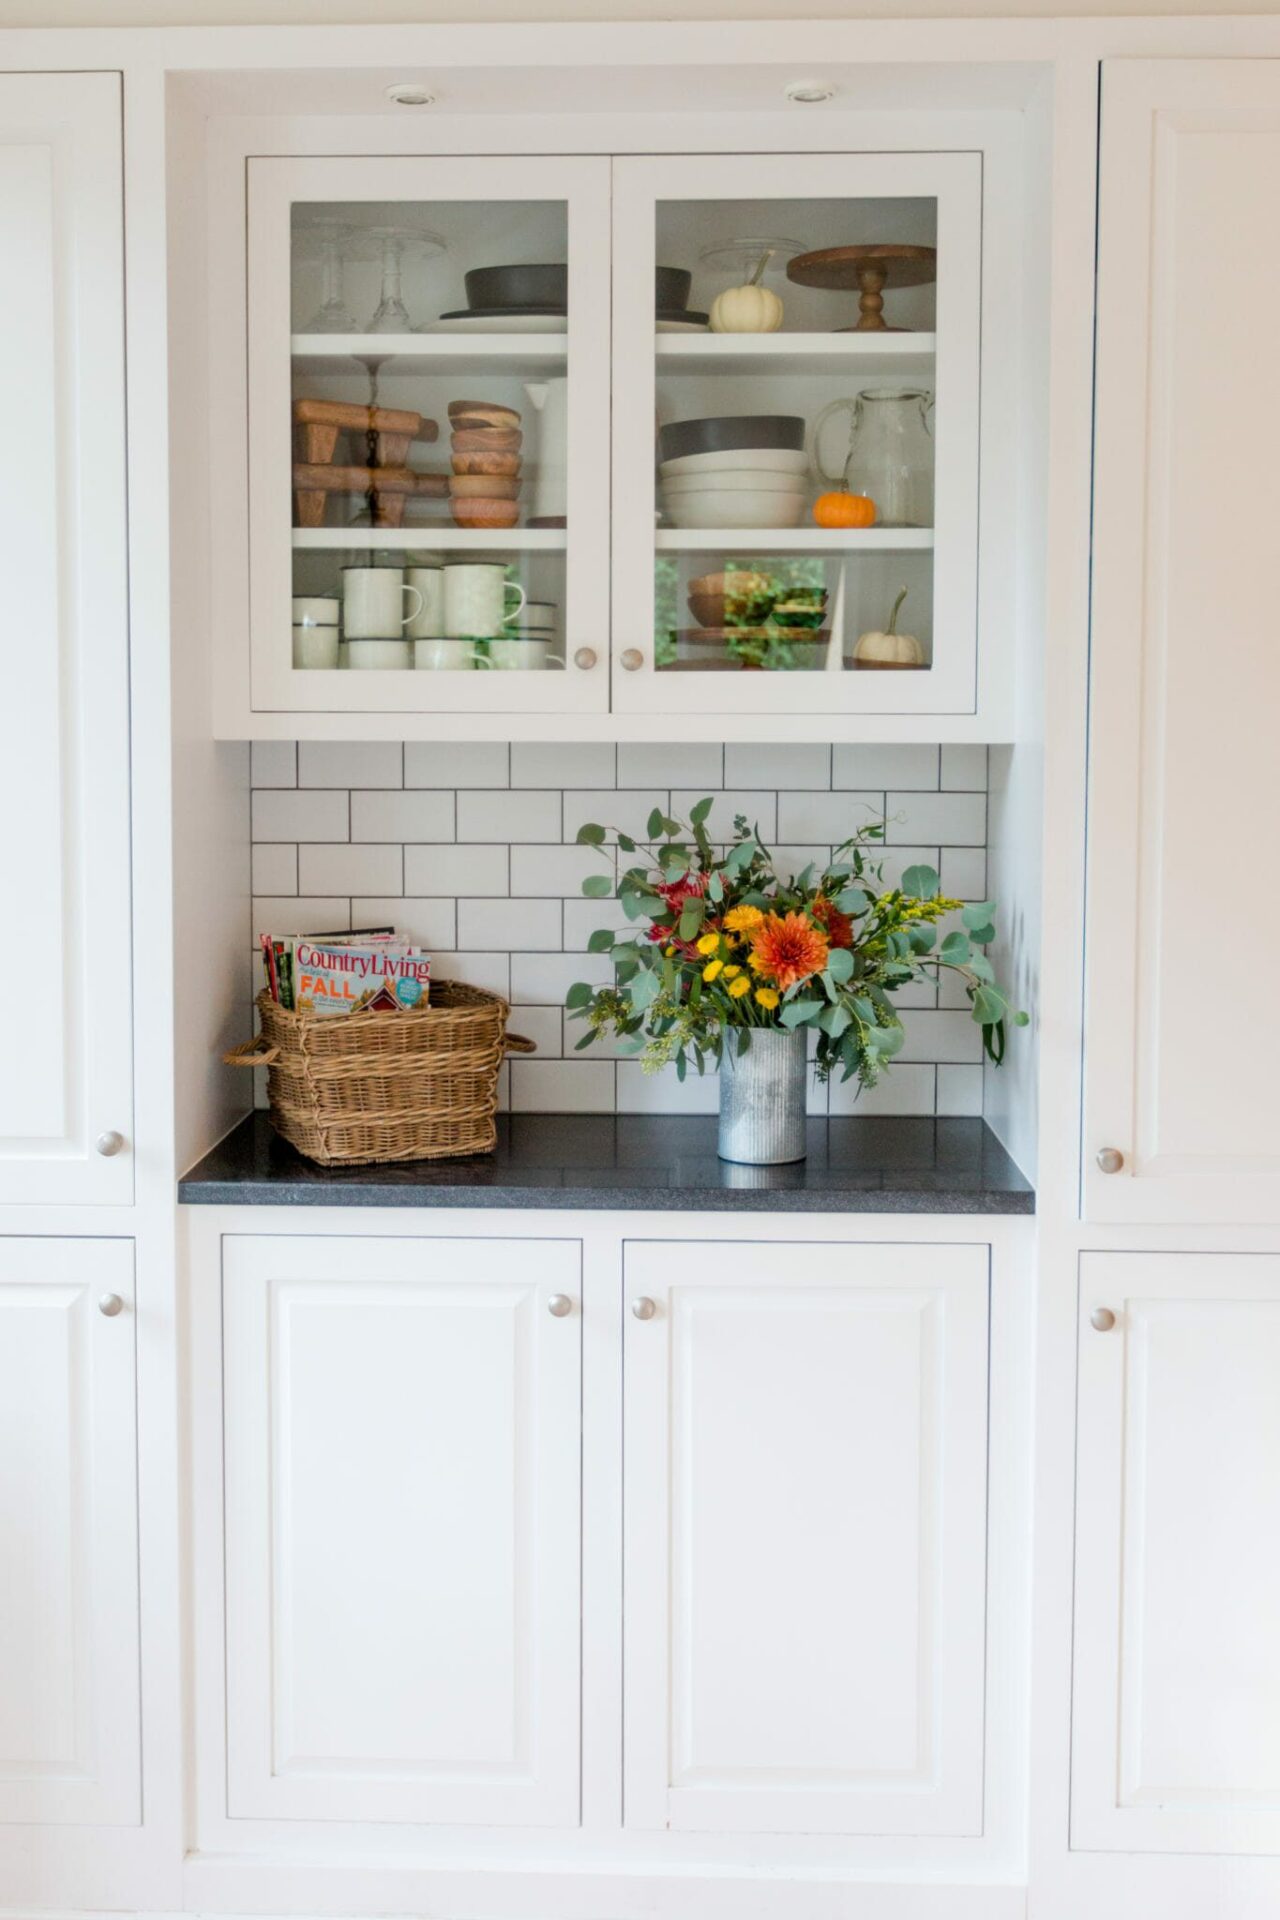 Easy Kitchen Remodel: Simple Changes to Transform the Look of Your Kitchen || JennyCookies.com #kitchen #kitchenremodel #diykitchen #jennycookies